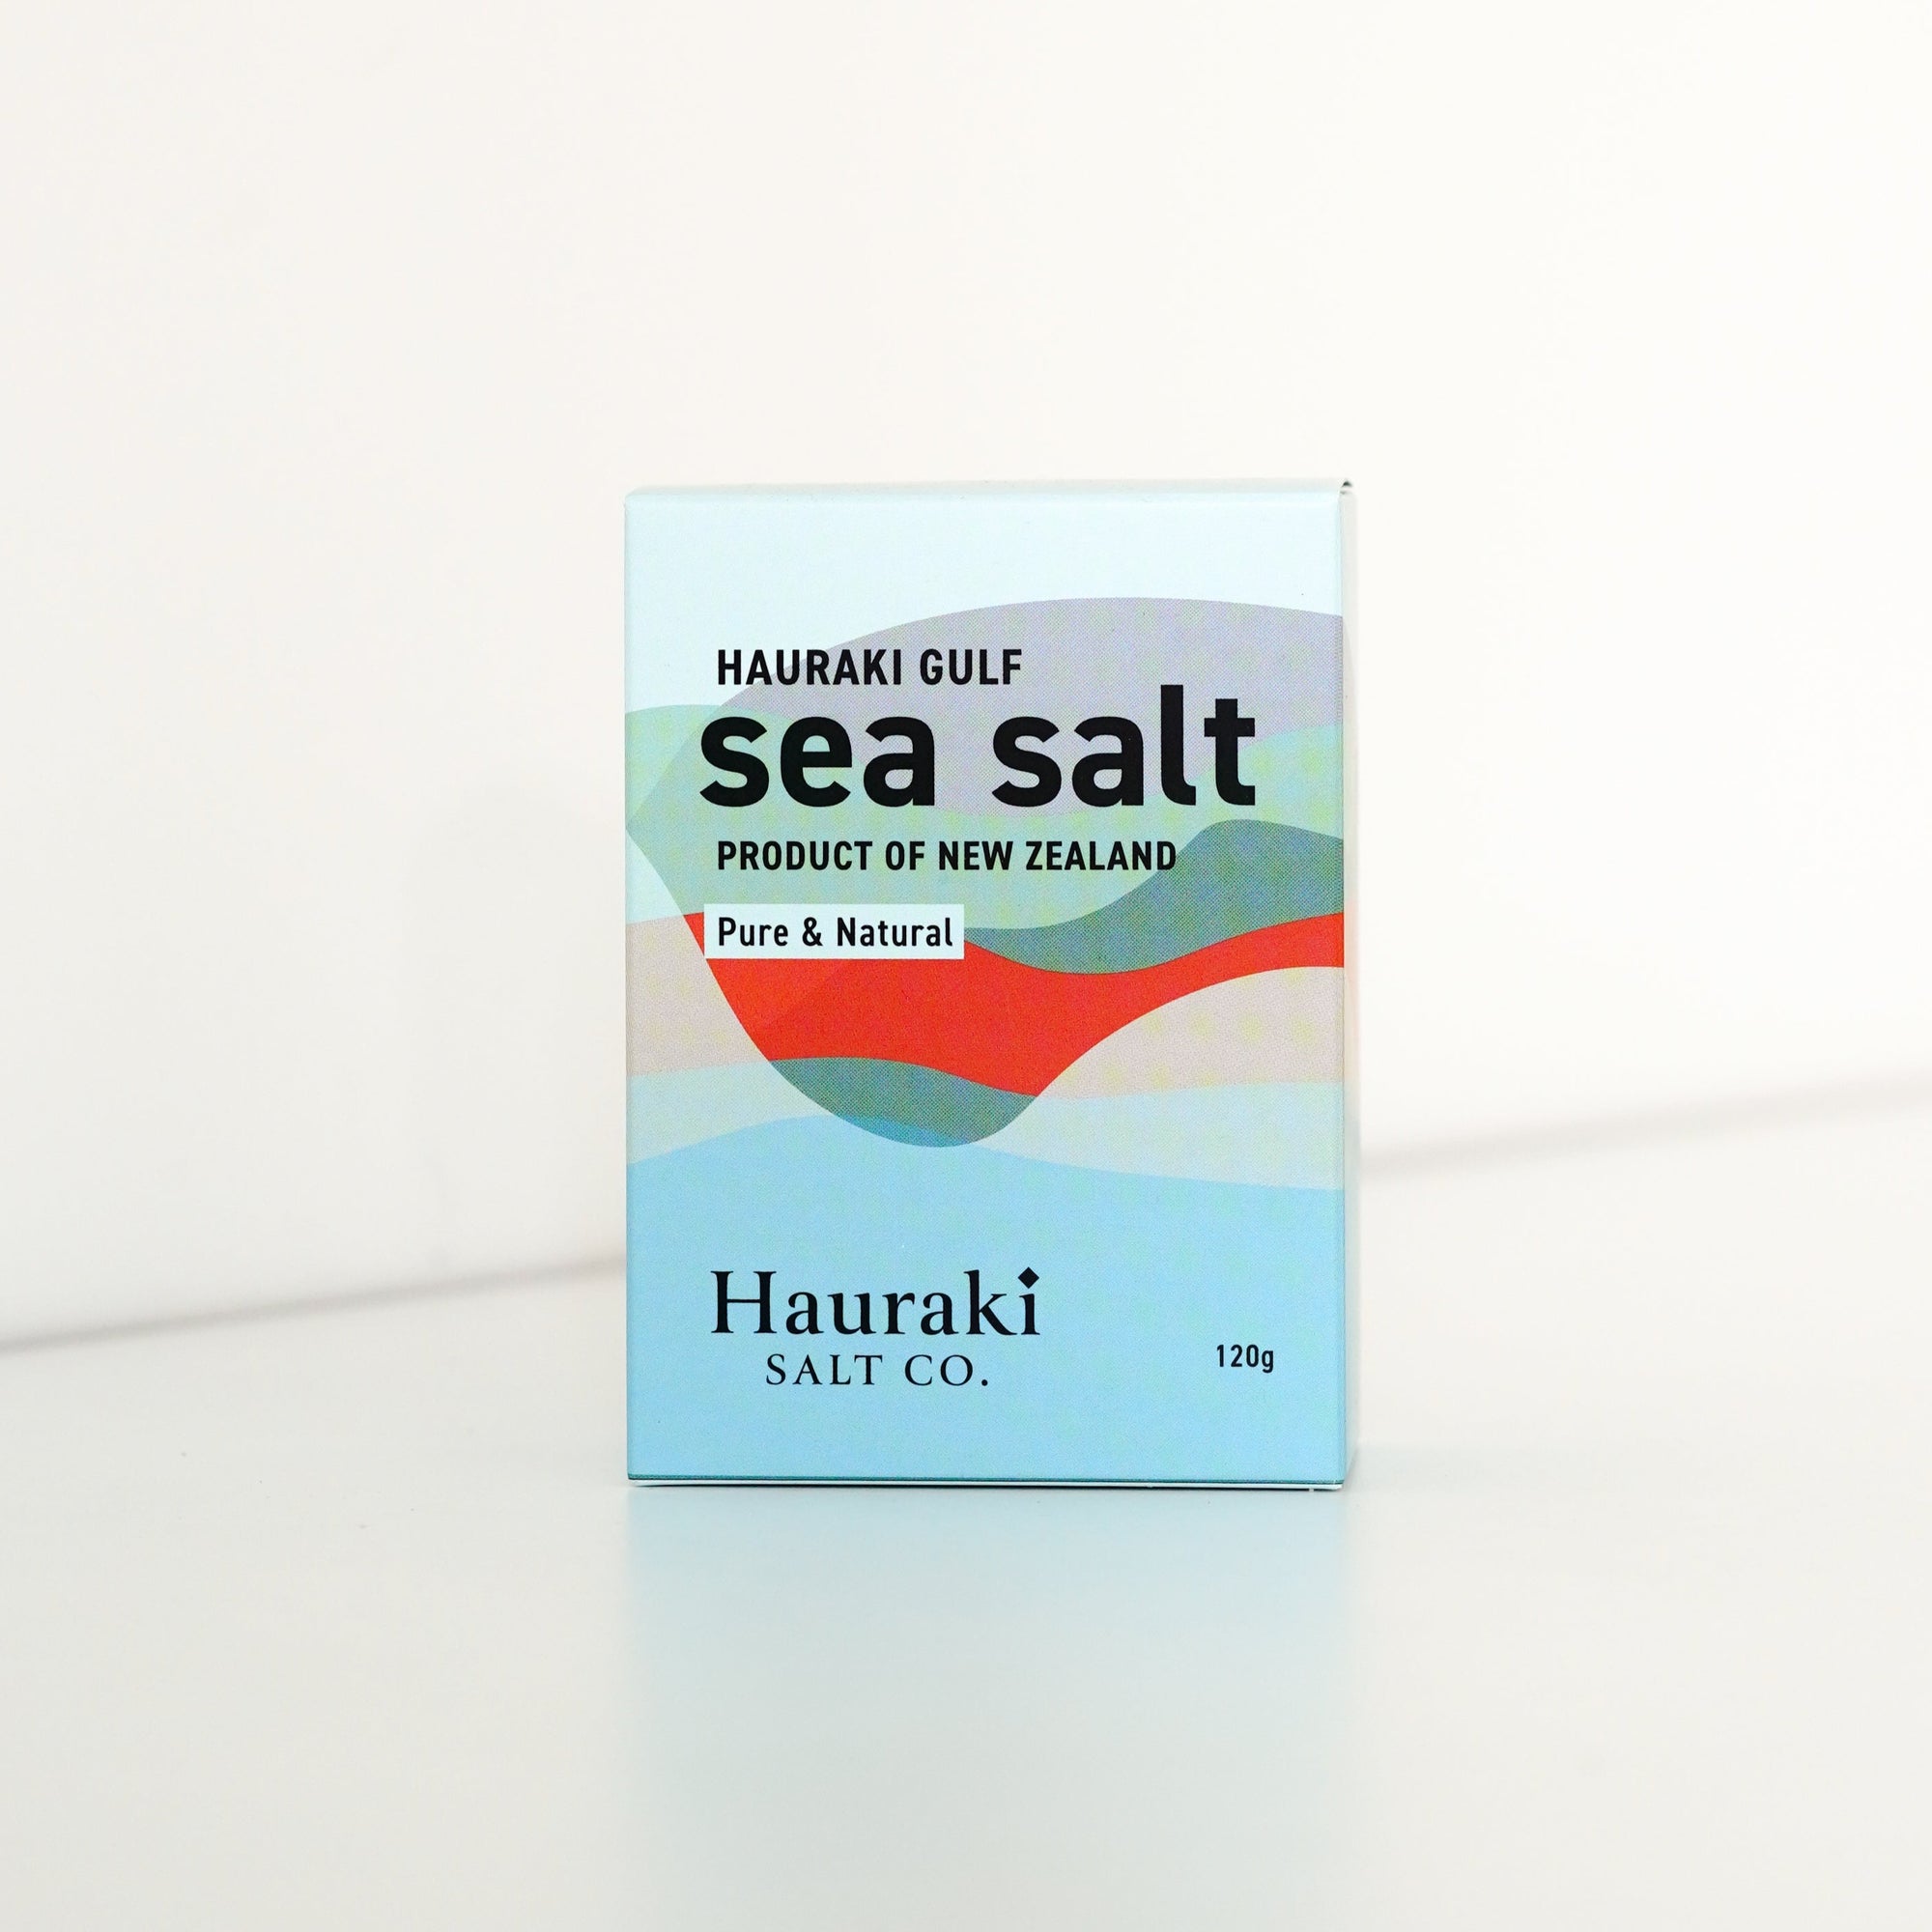 image of a rectangular blue and red box with black text. the text says 'Hauraki Gulf sea salt' and is 120grams